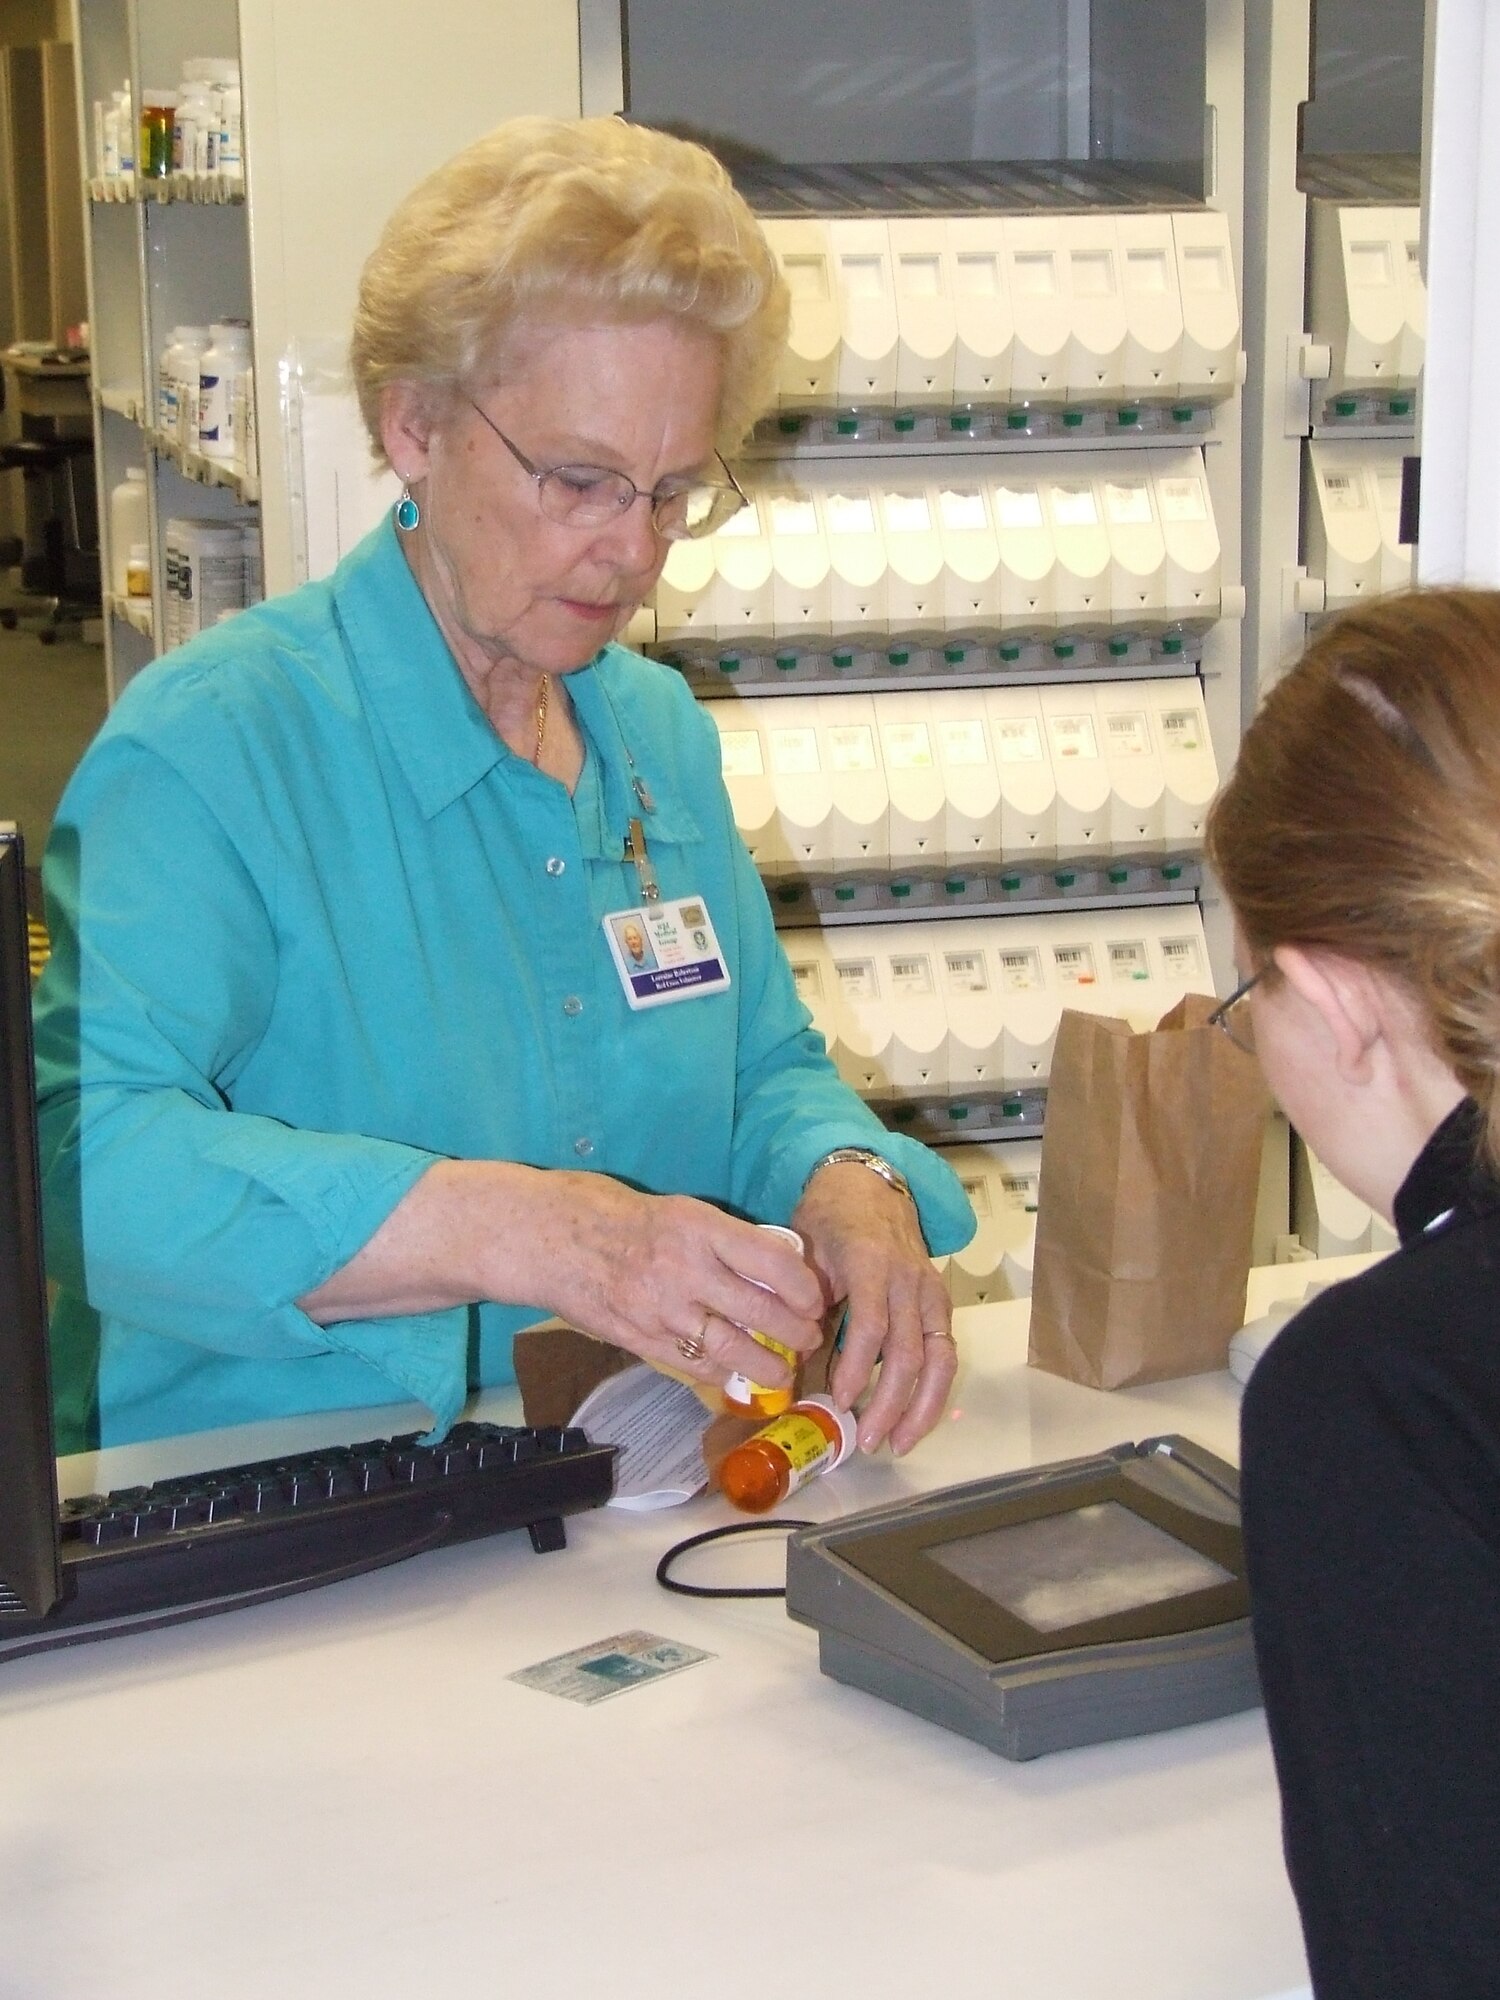 Lorraine Robertson, one of the 62nd Medical Group’s volunteers,
helps a customer get her prescription filled at the clinic’s
pharmacy.